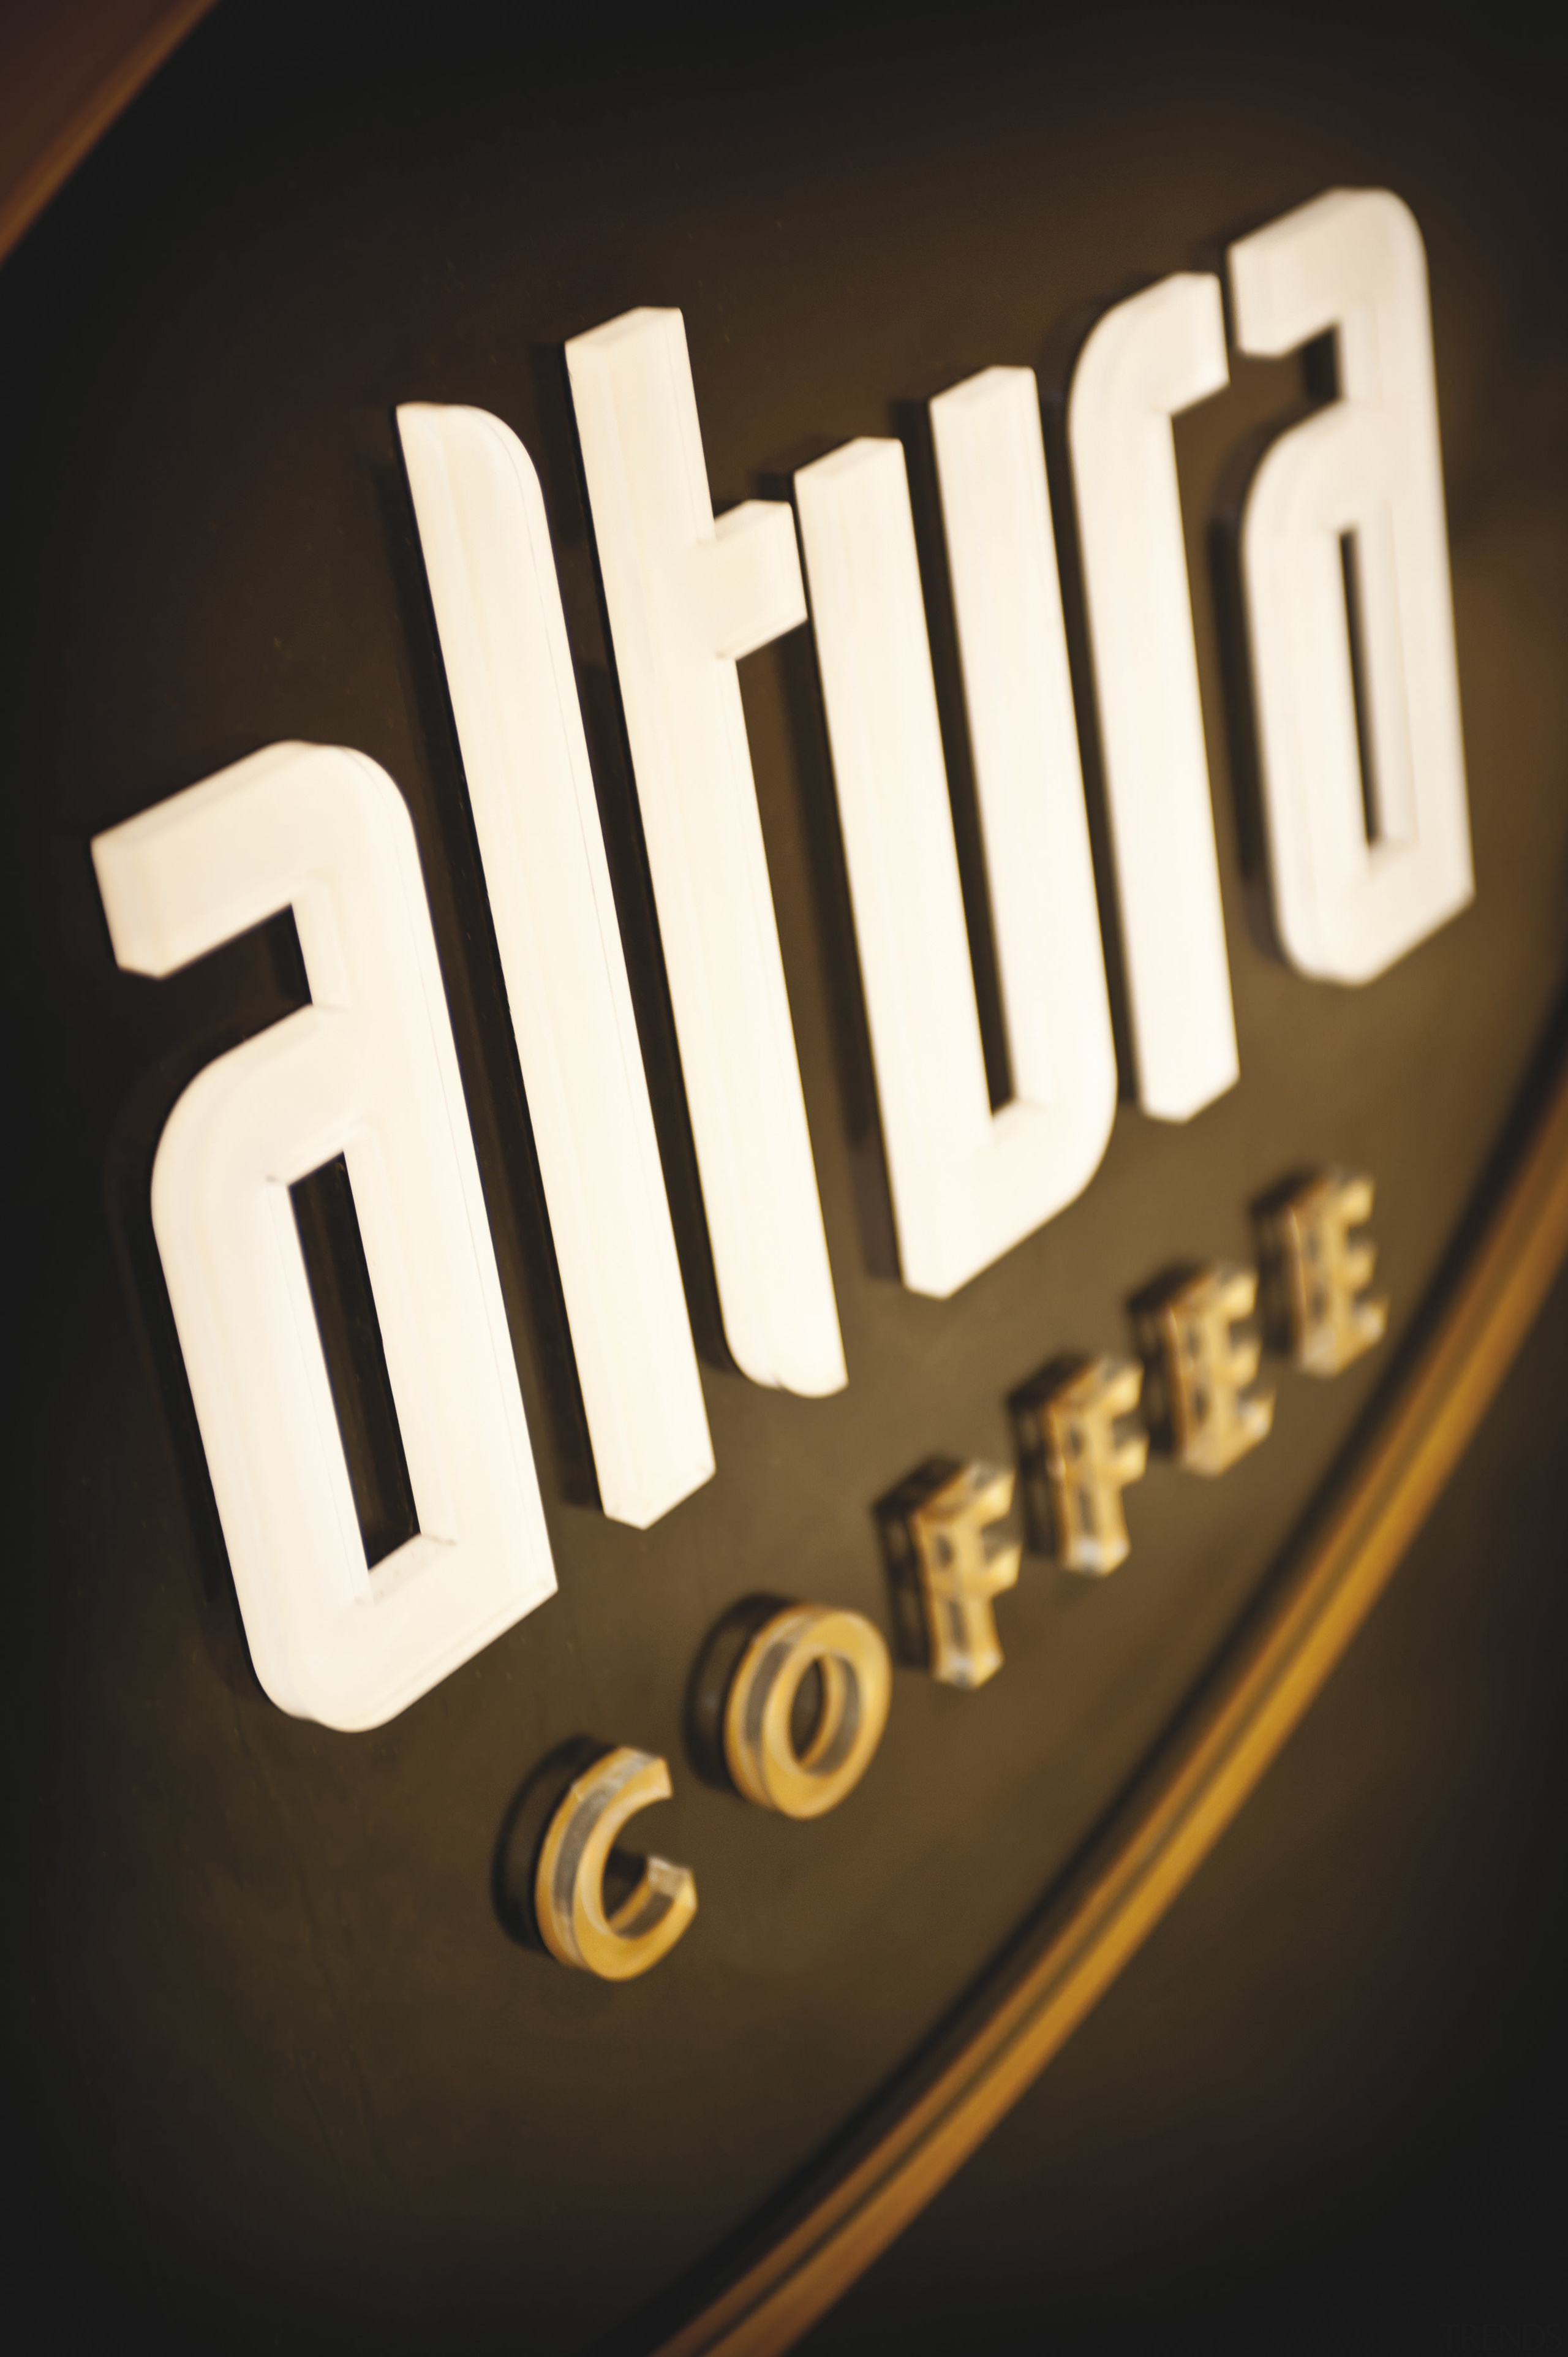 The Altura Coffee sign. - The Altura Coffee brand, font, logo, text, black